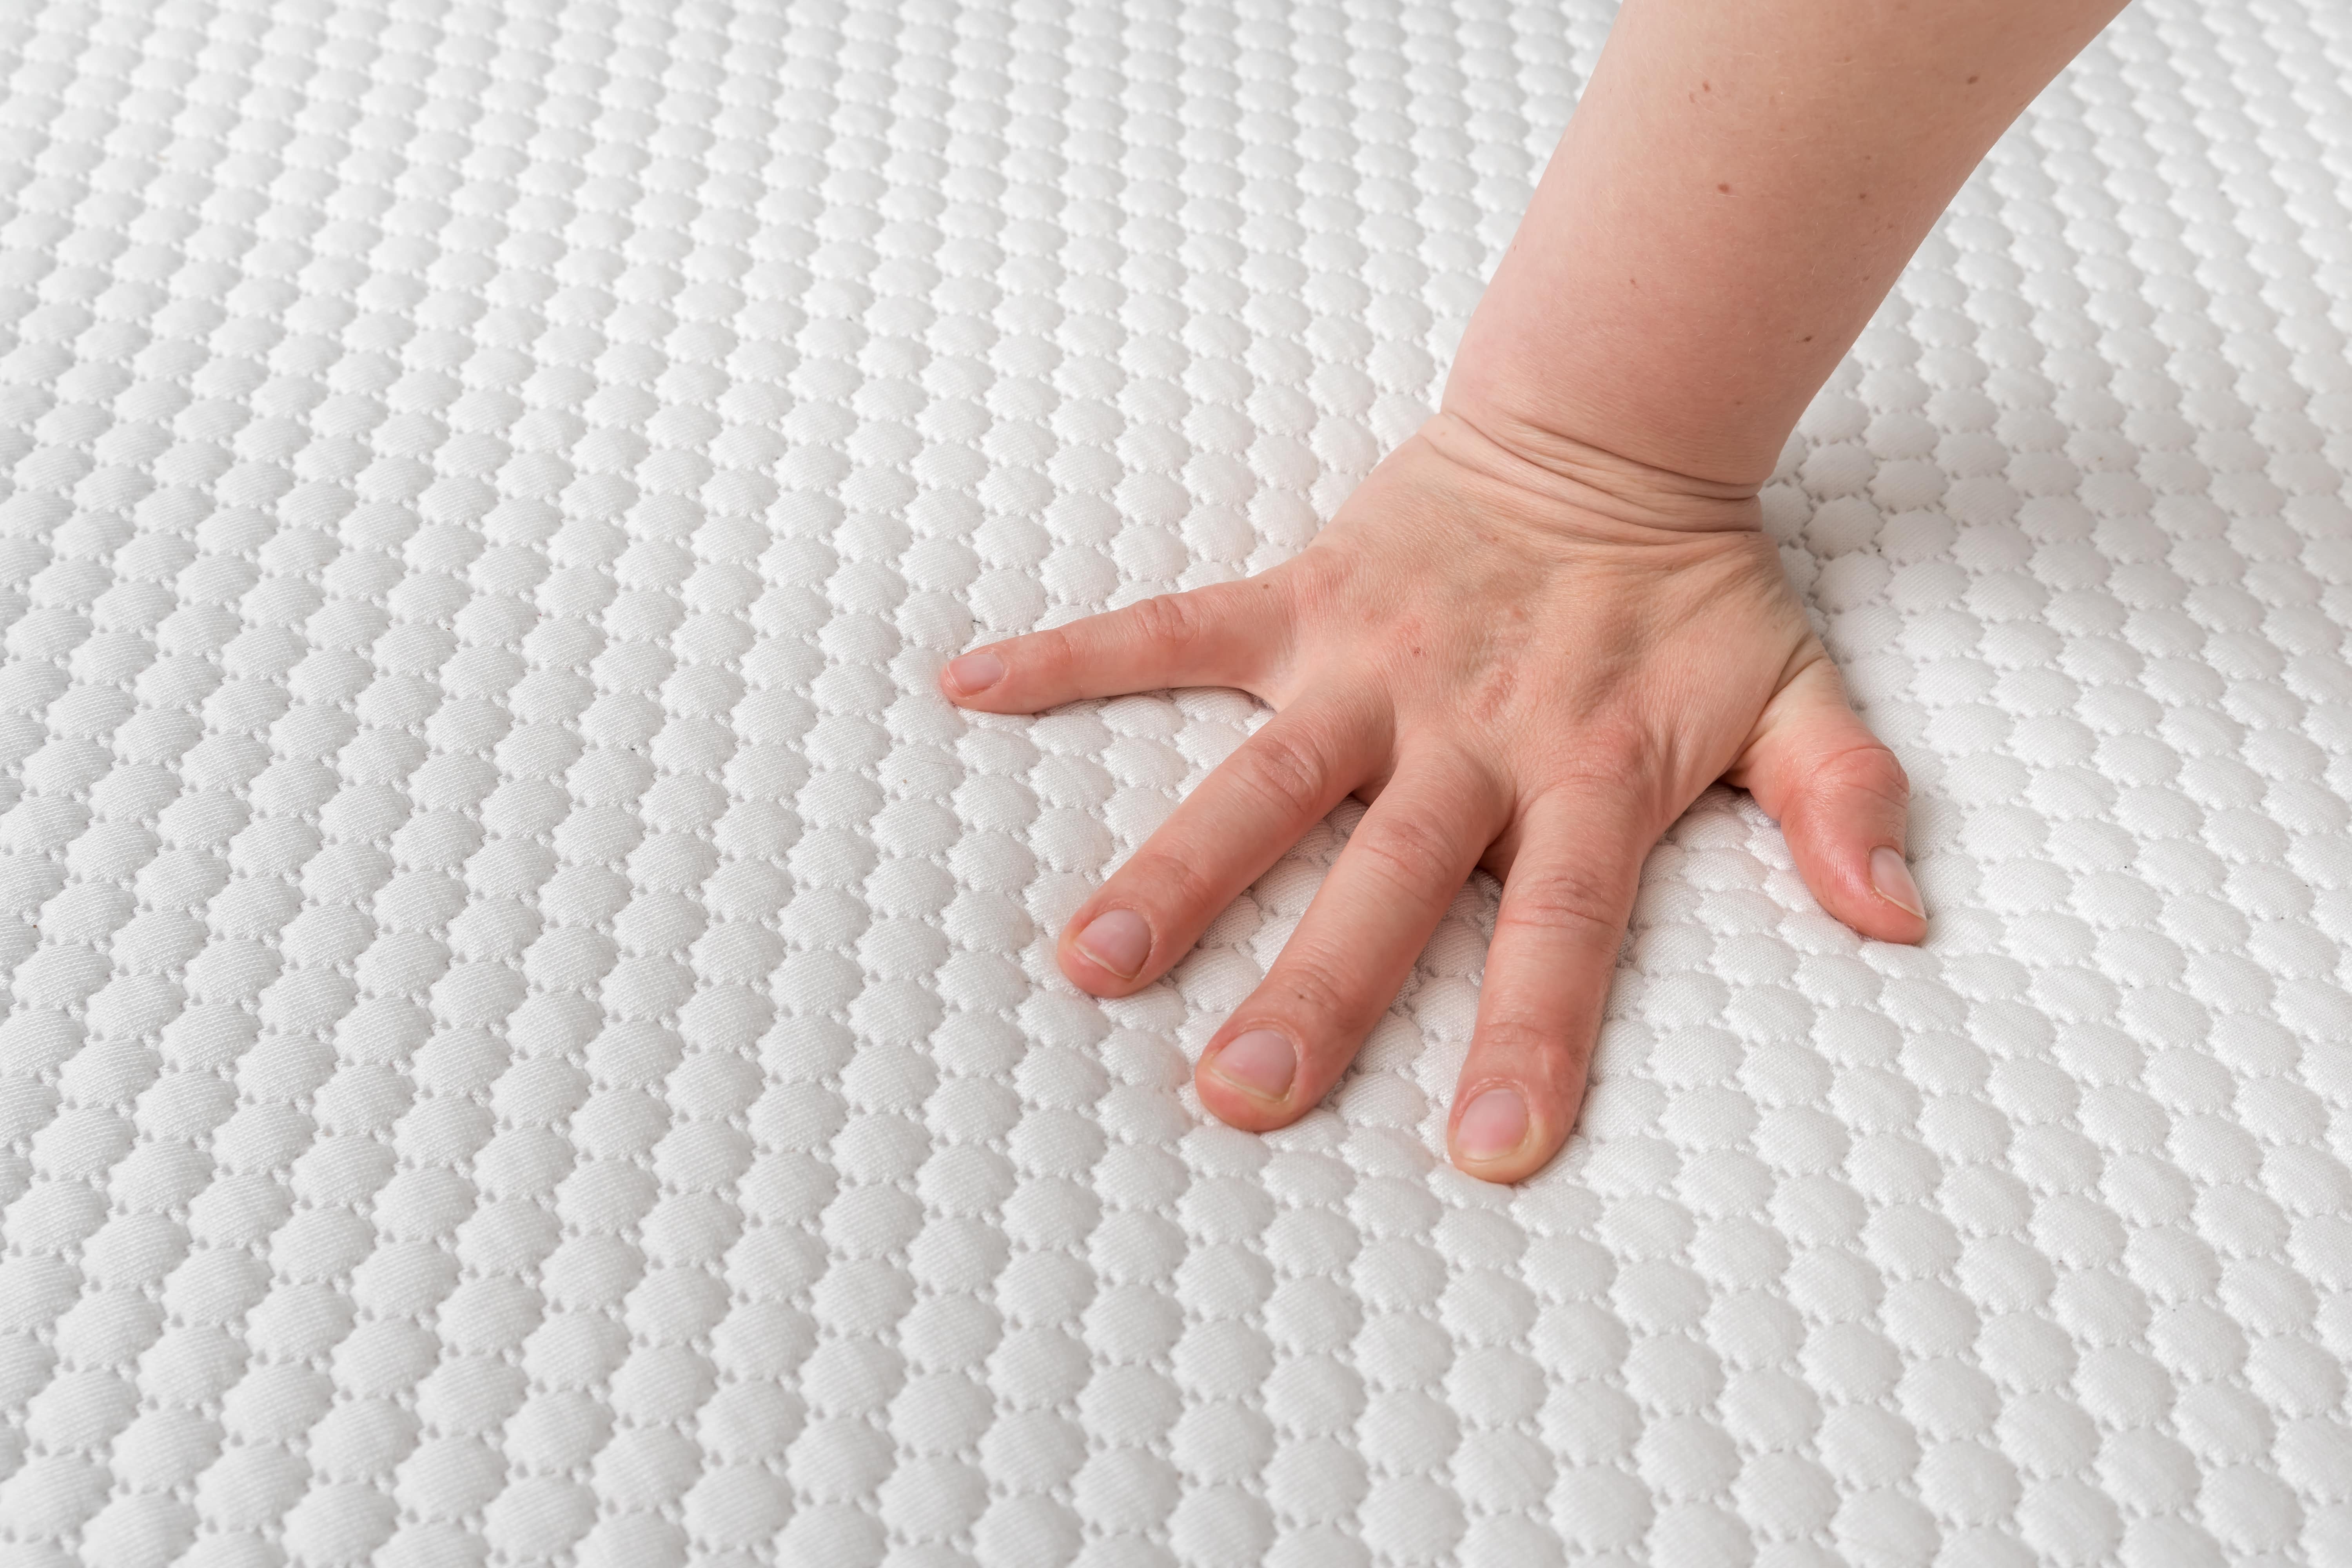 A person testing the responsiveness of the surface of their new mattress with their hand.